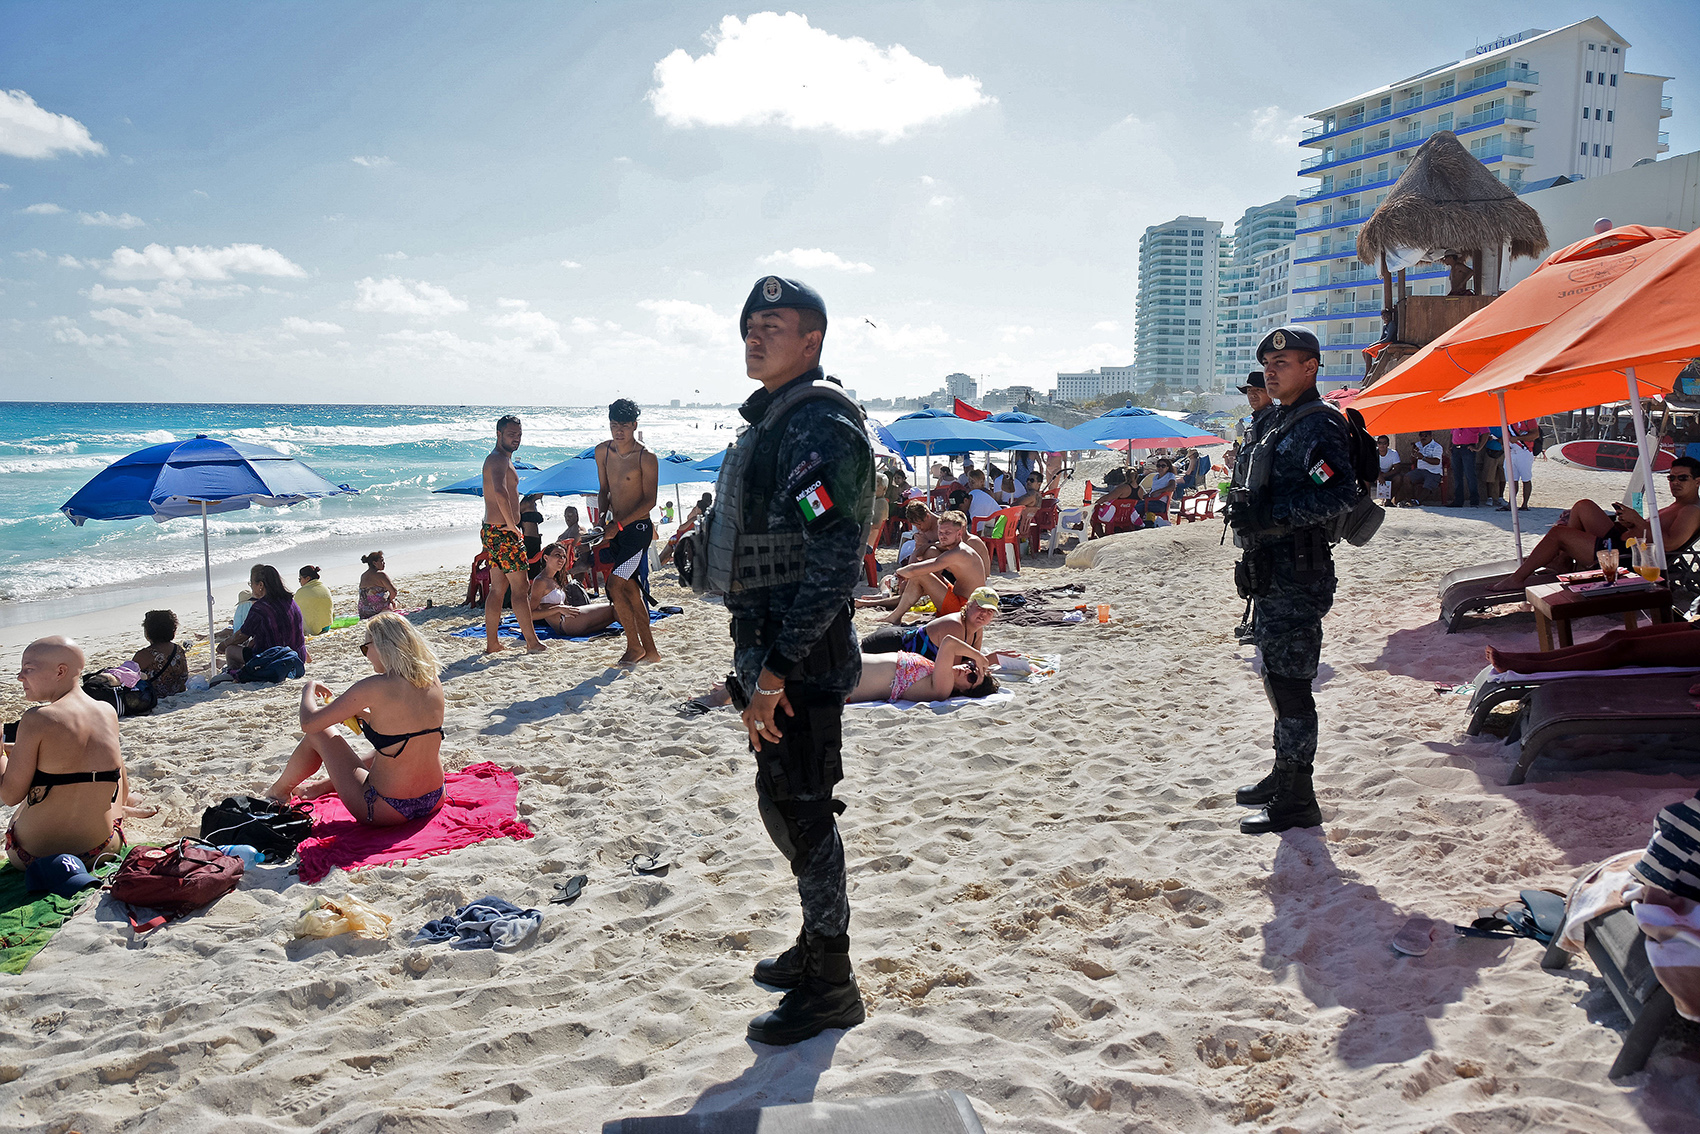 Two police officers stand on a beach flanked by tourists bathing.